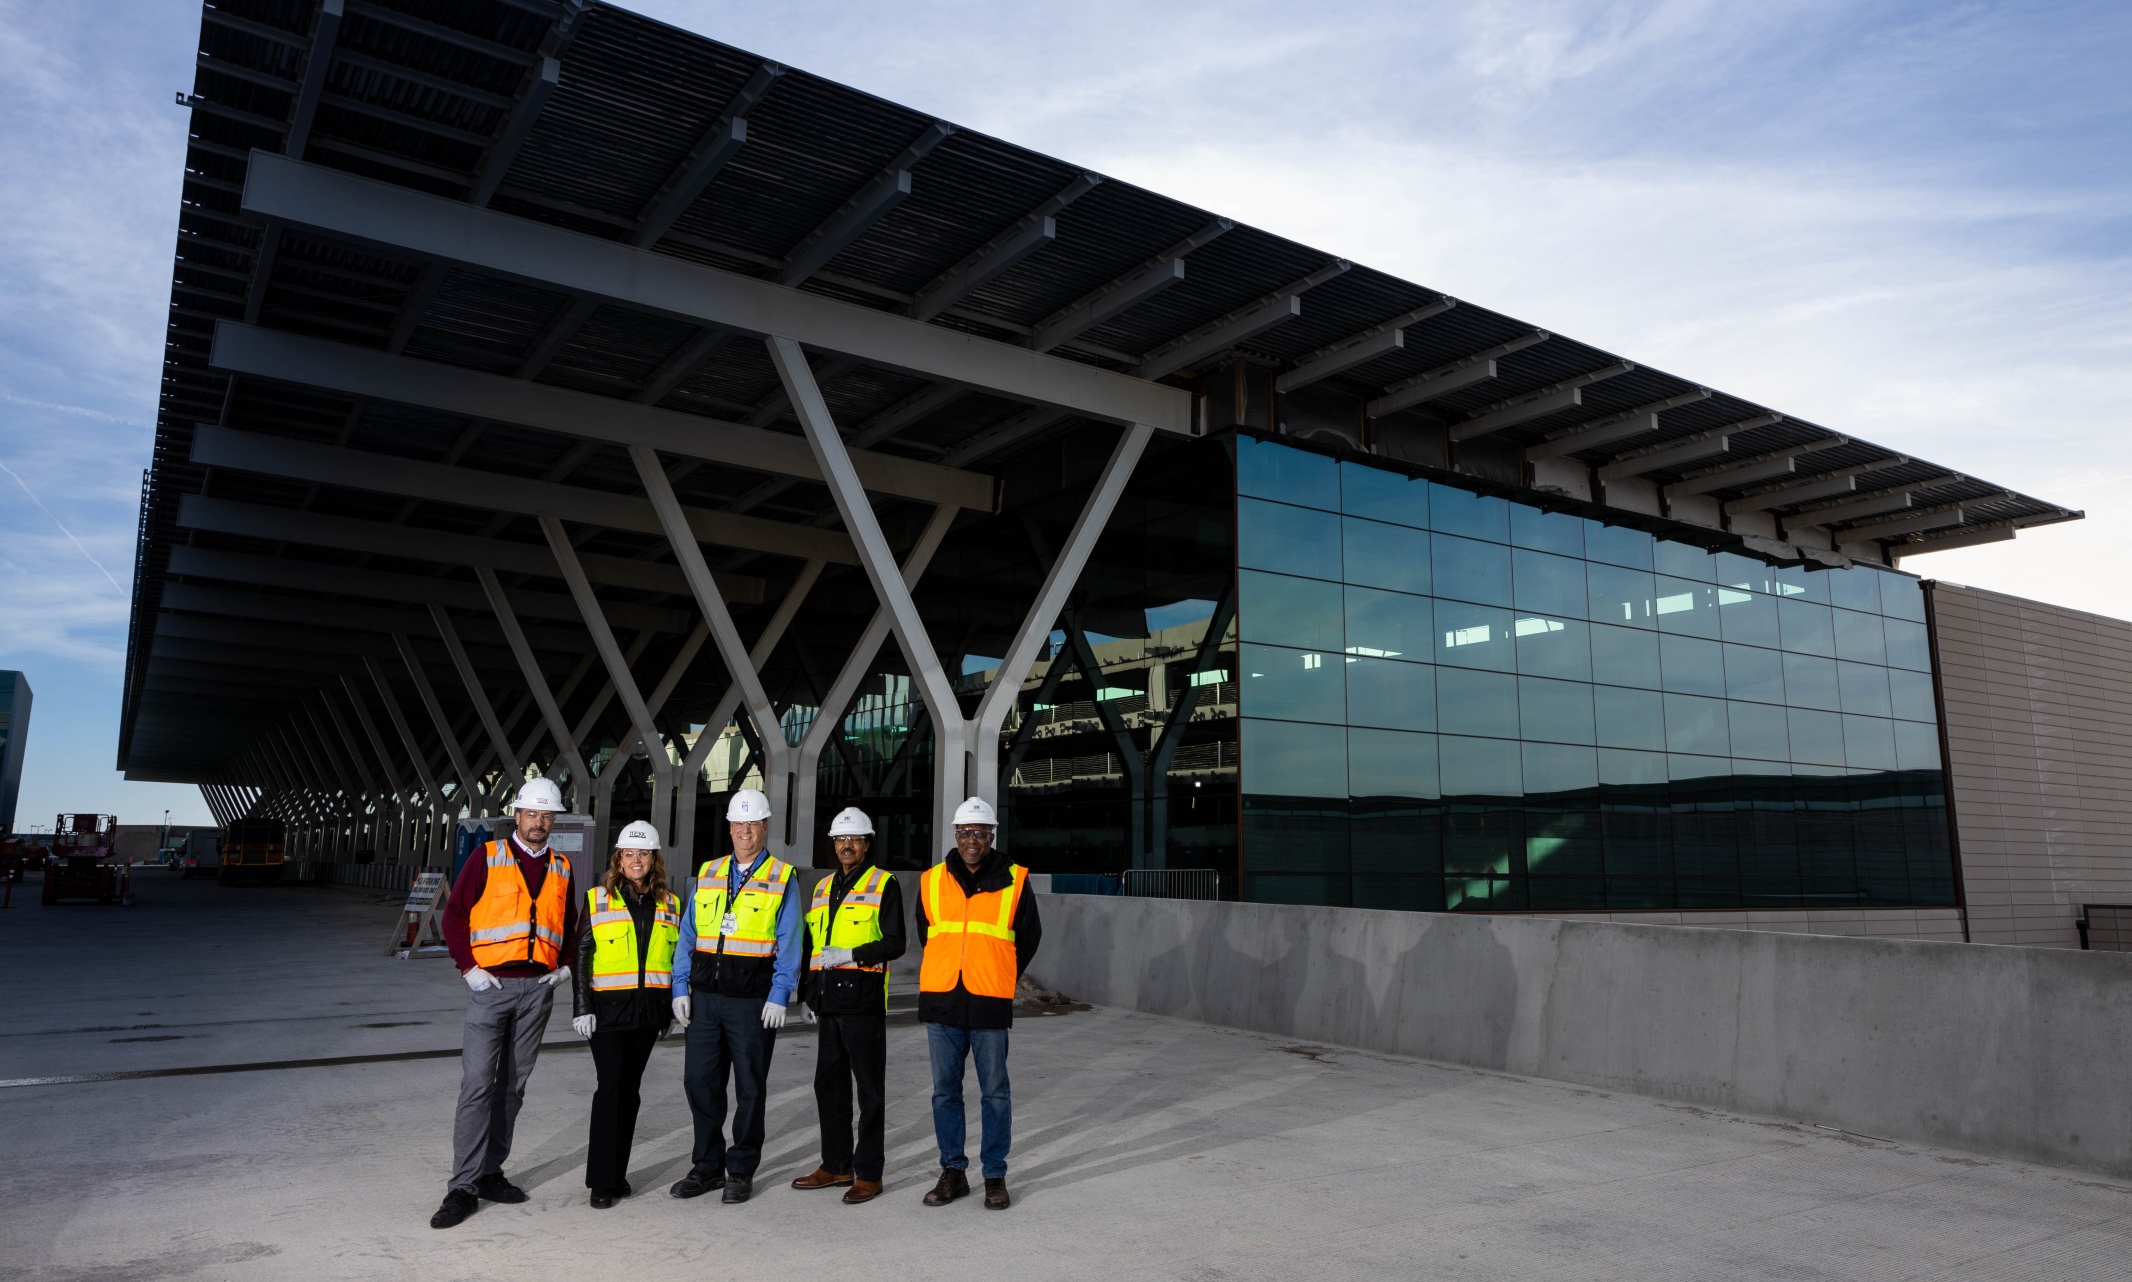 Alumni stand in front of the new KCI terminal 